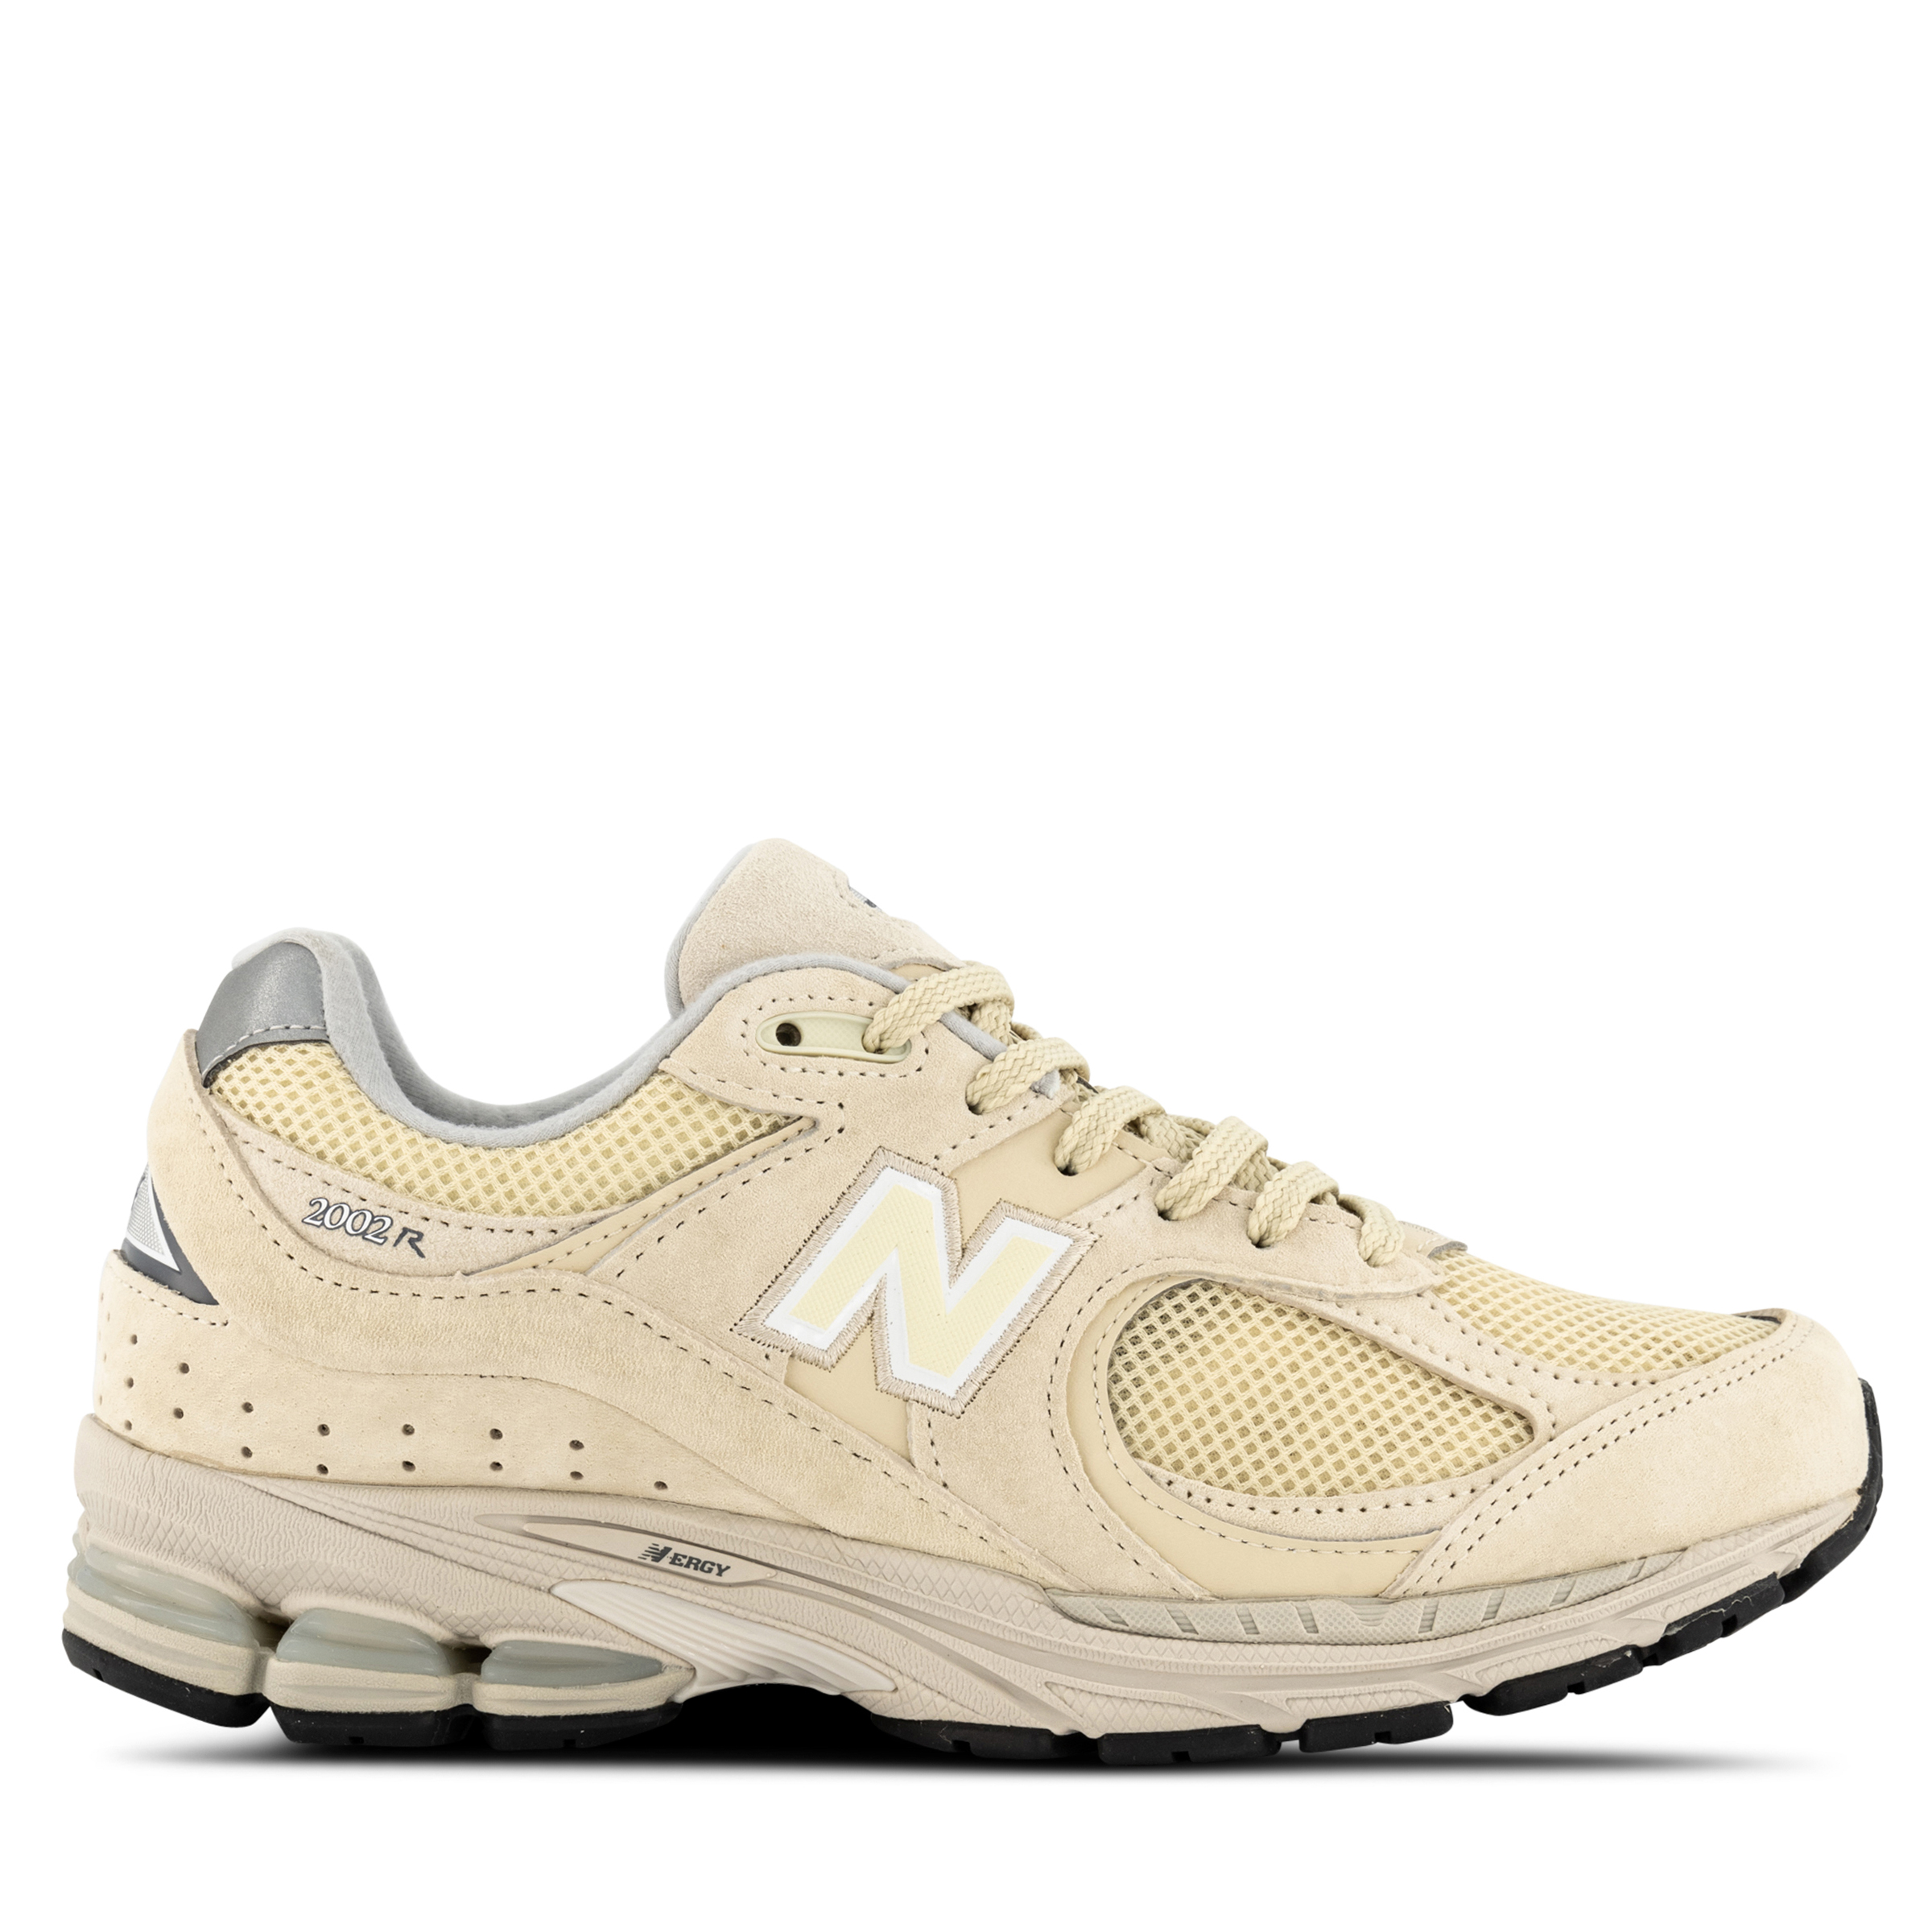 New Balance | NB Shoes & Sneakers Online | Hype DC | Hype DC